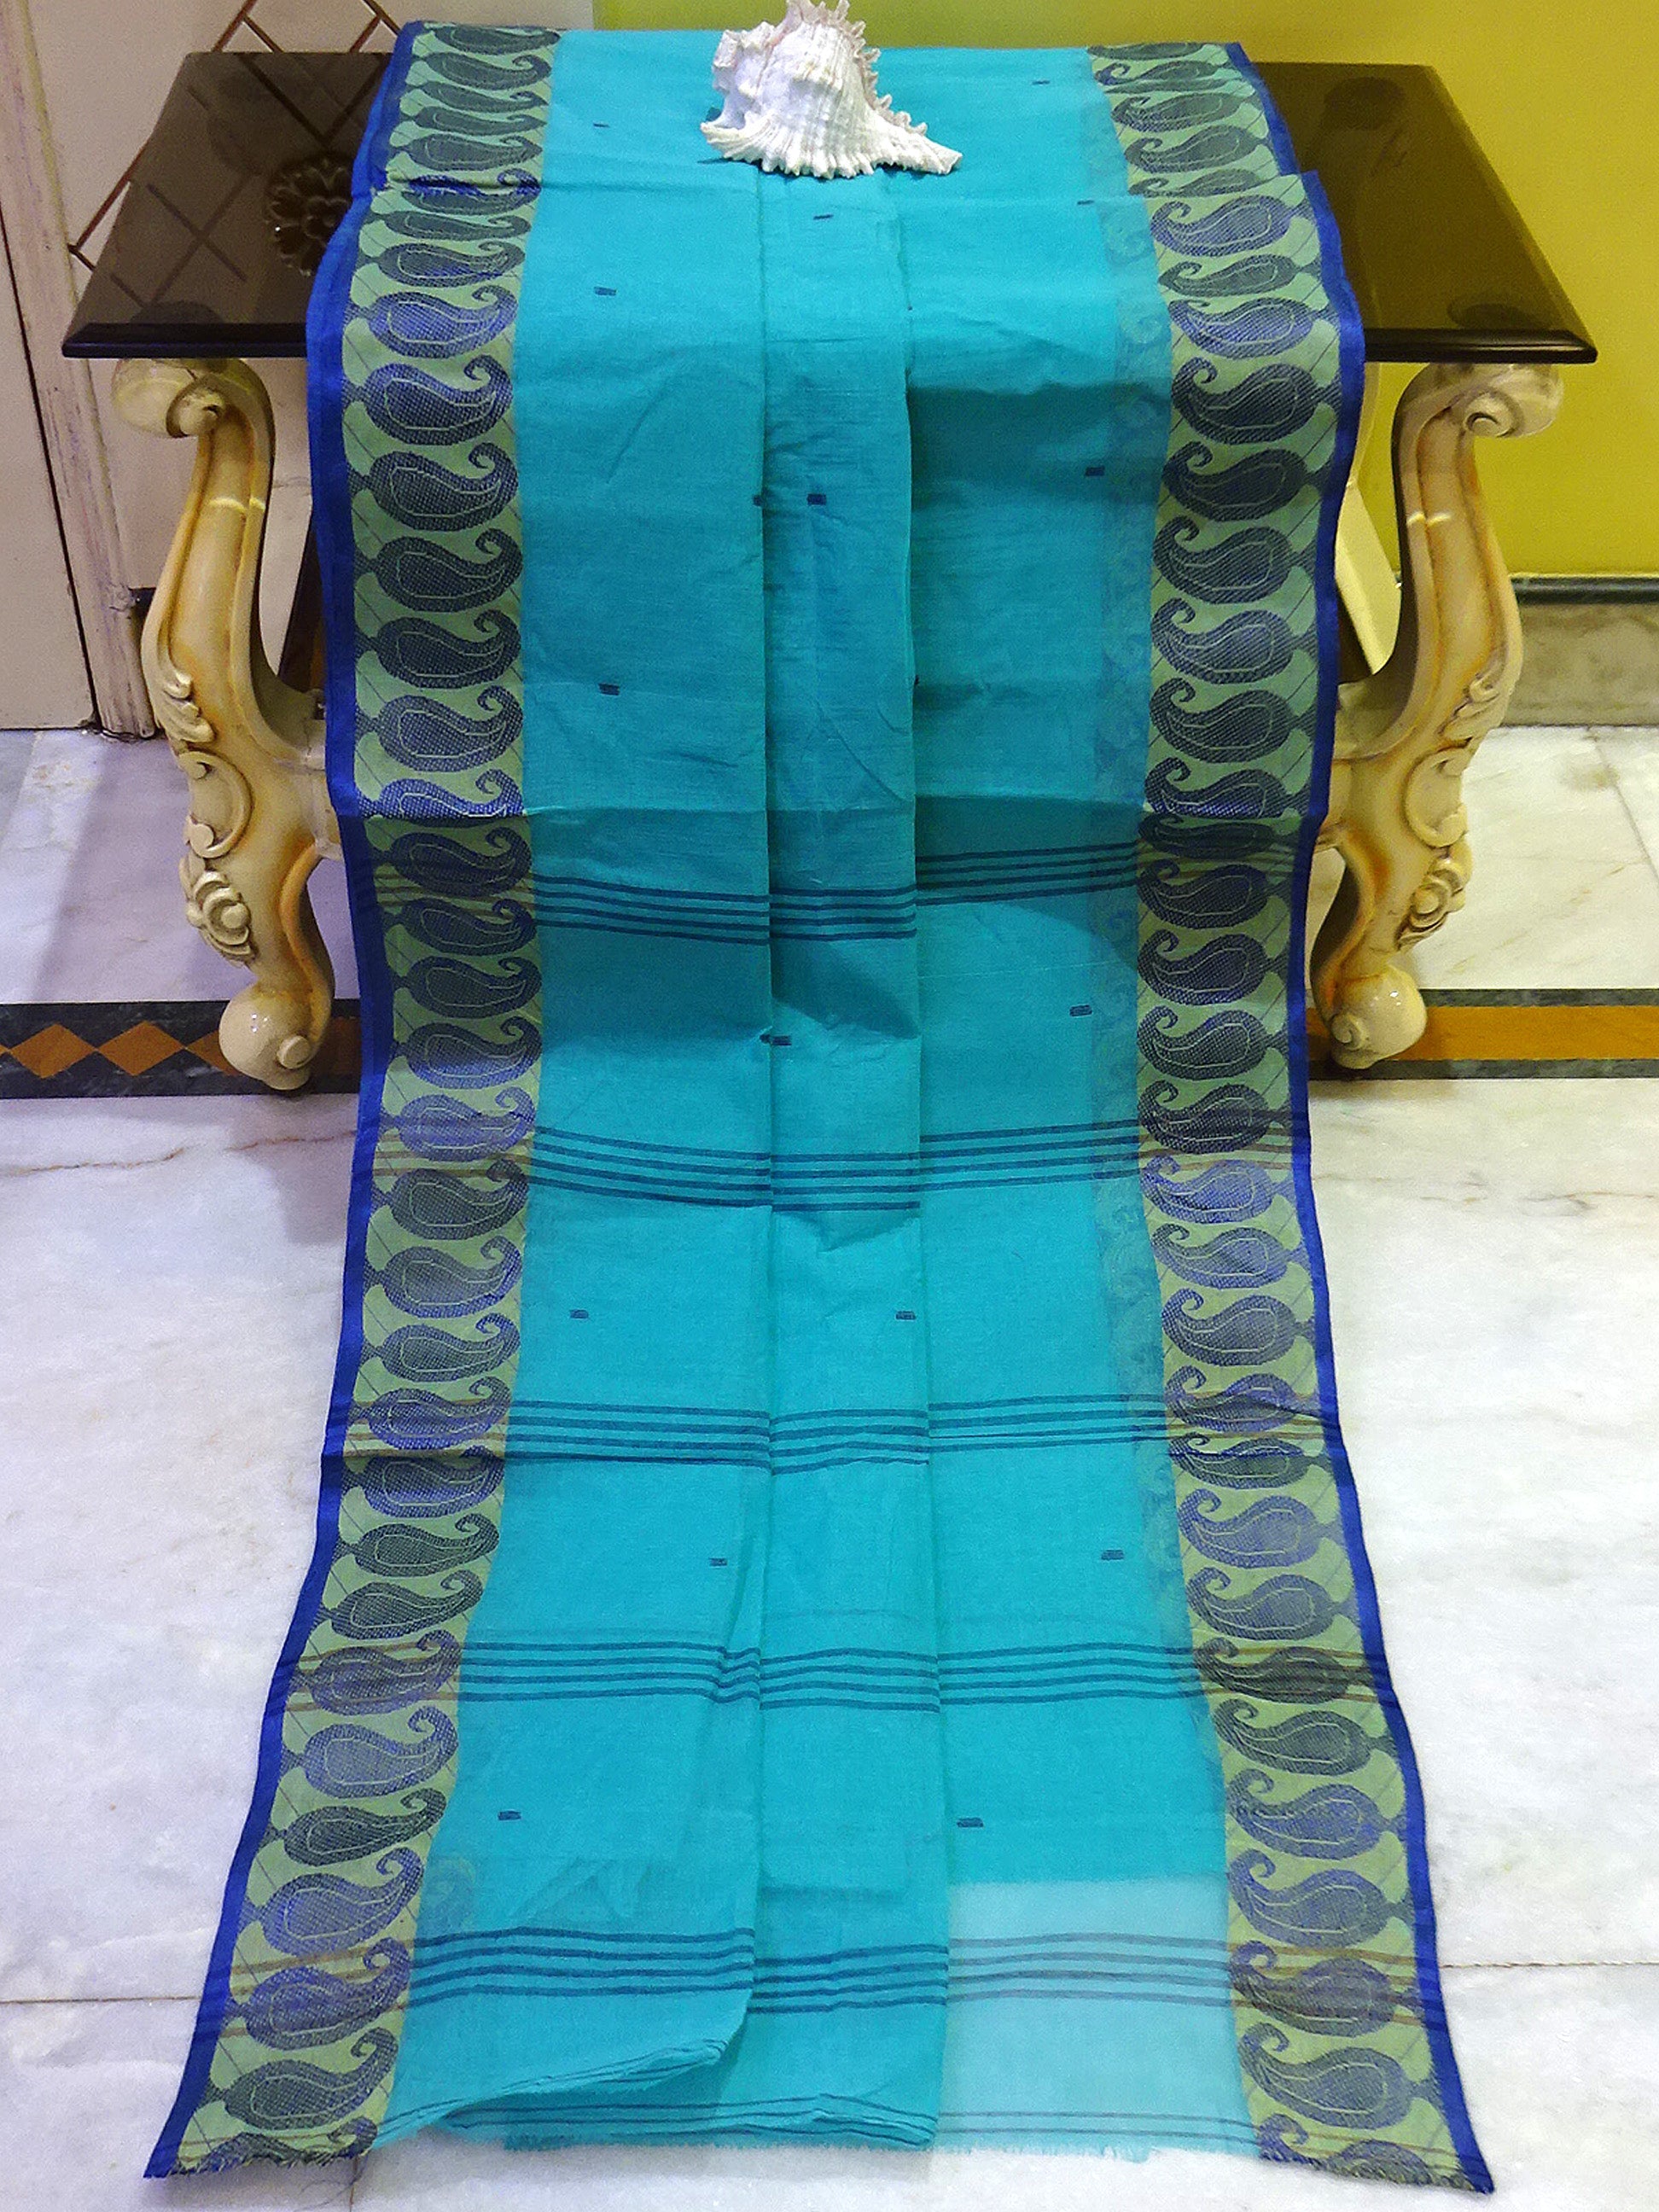 Woven Paisley Motif Work Bengal Handloom Cotton Saree in Sea Green and Blue